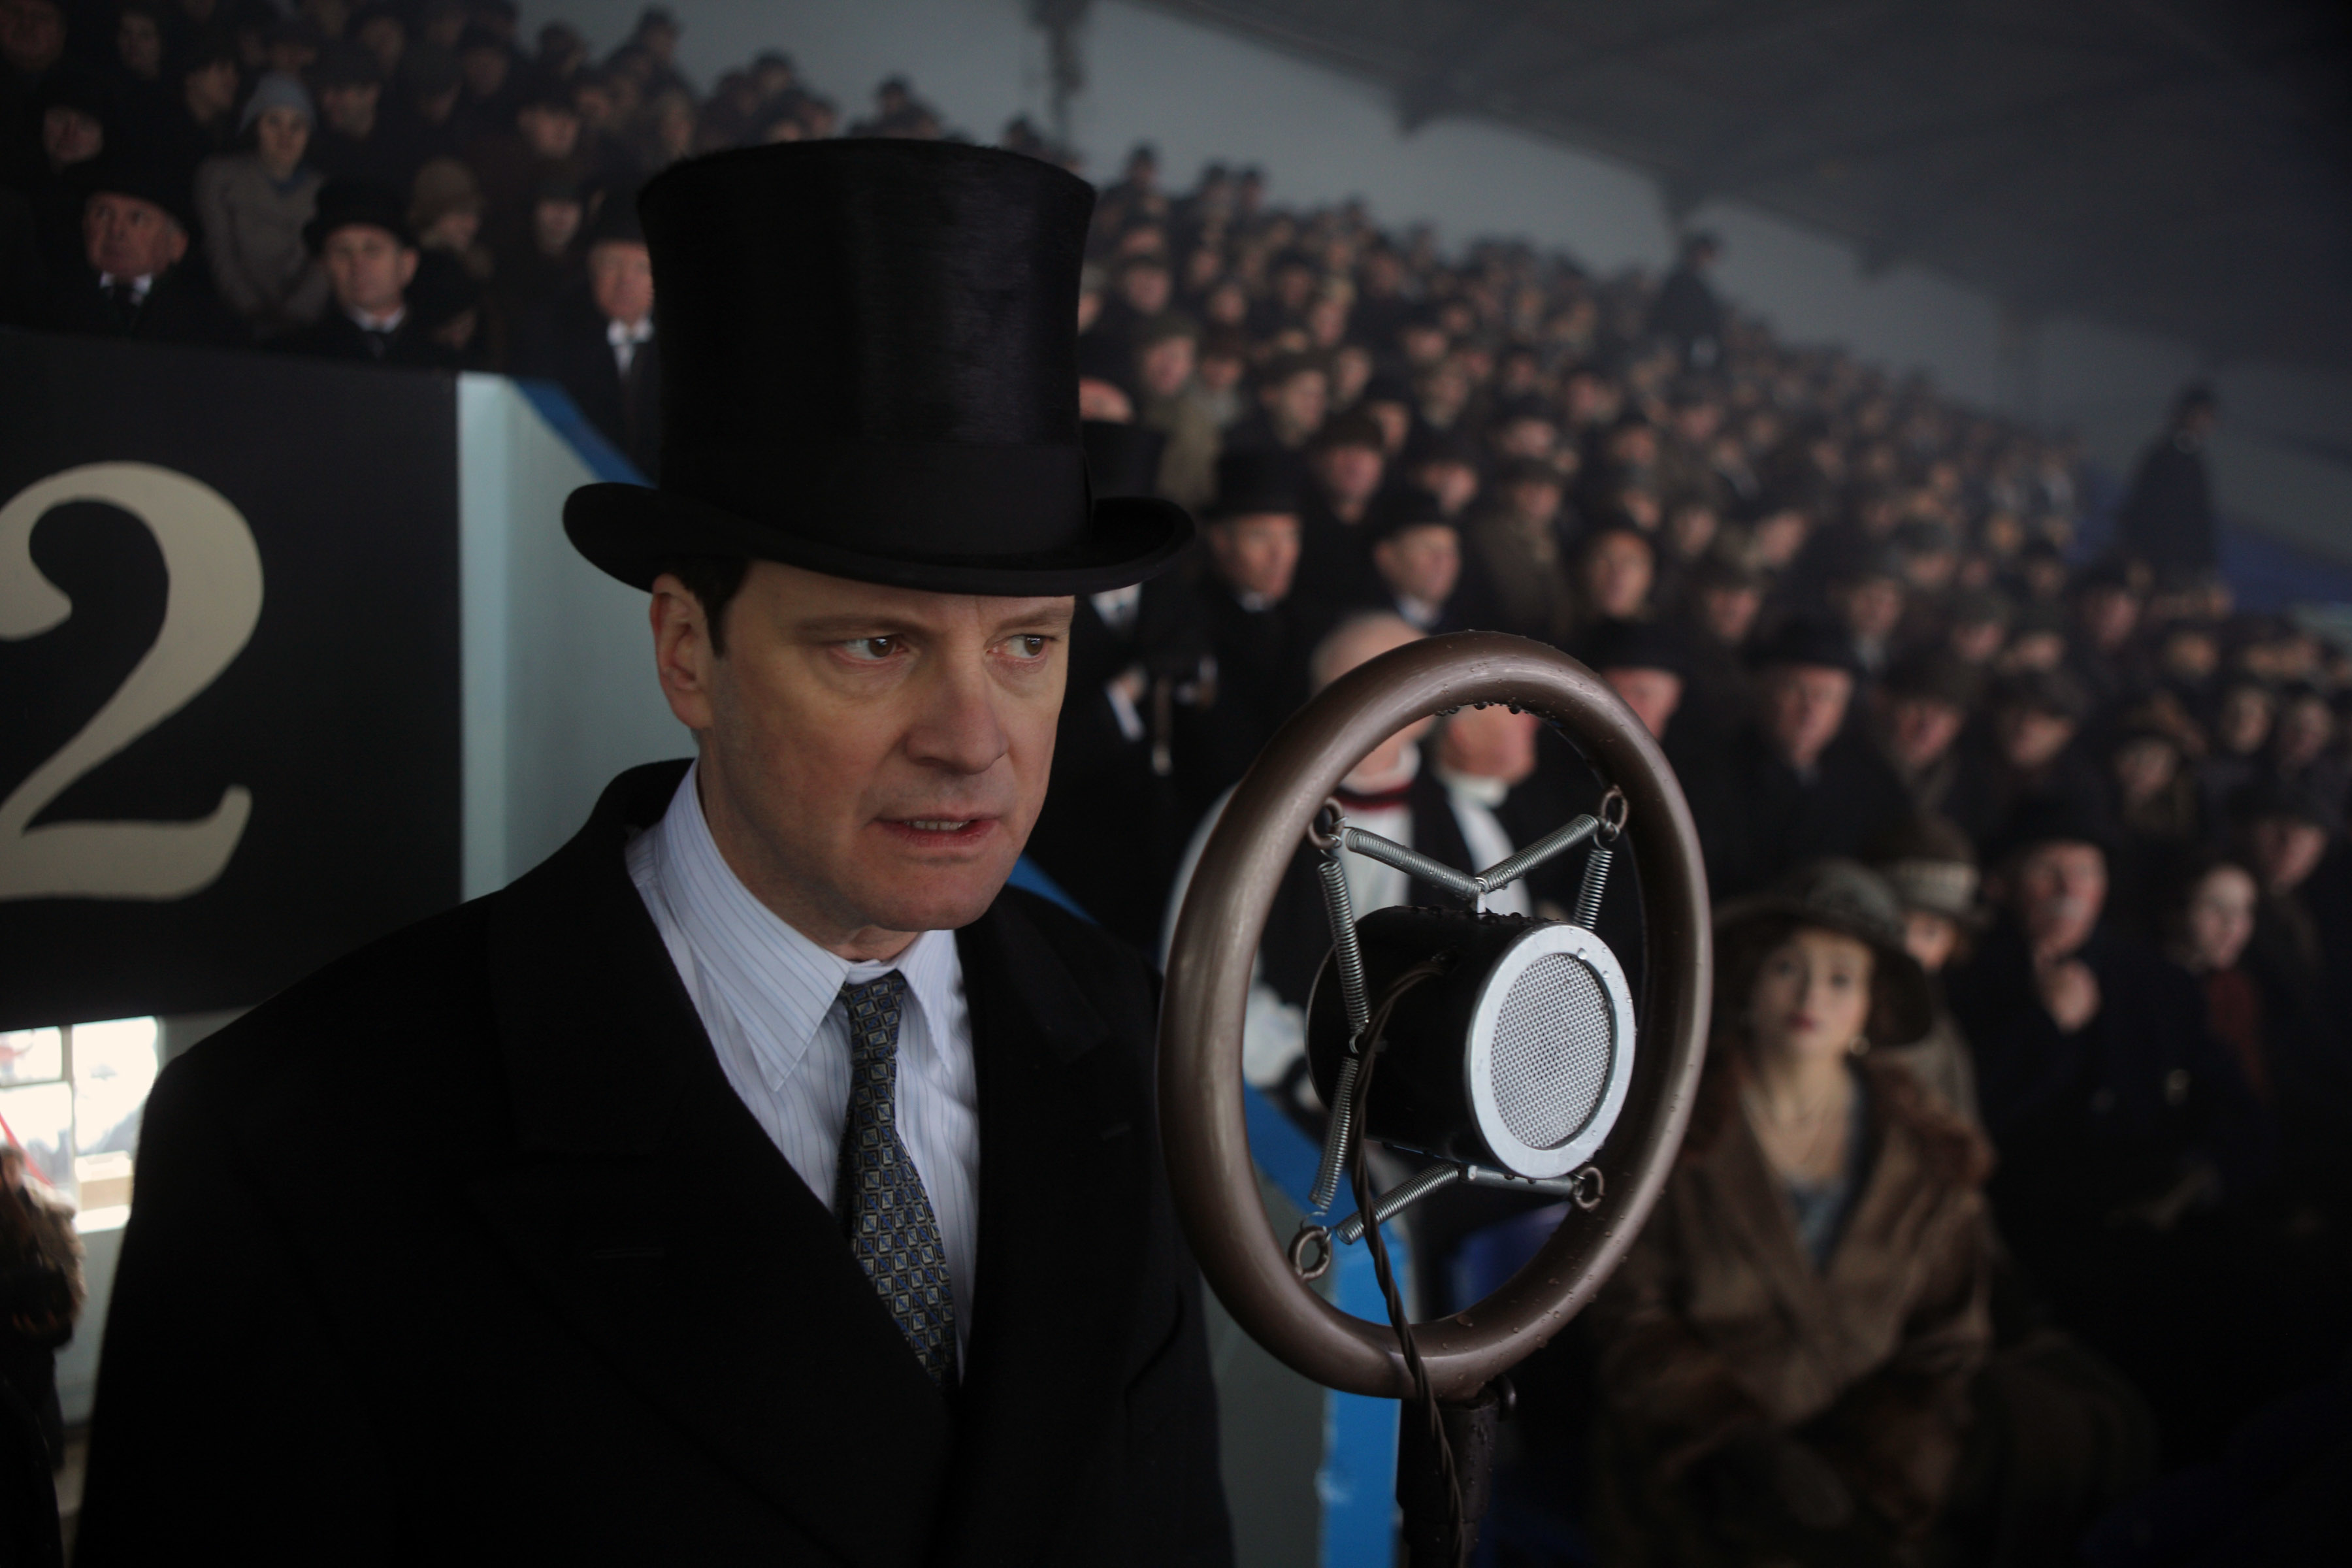 Colin Firth as King George VI, in a suit and tie and top hat, speaks into a vintage microphone